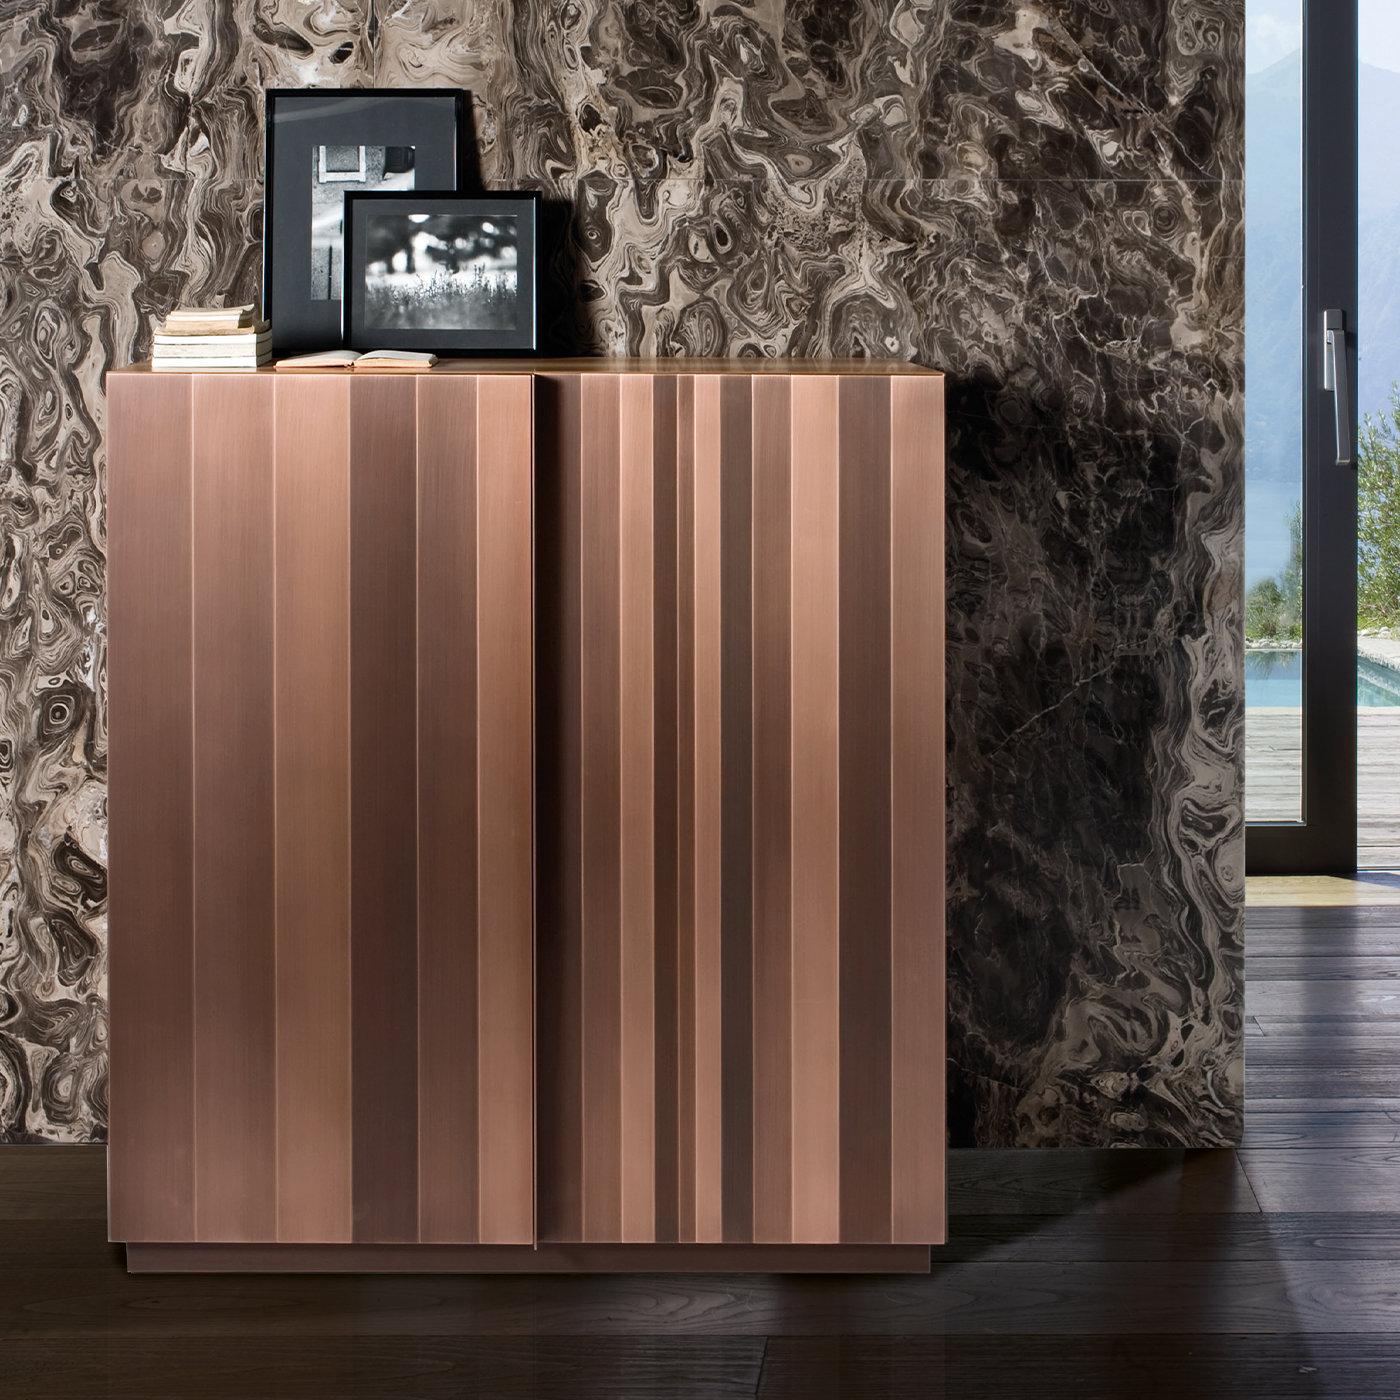 This bright and sophisticated sideboard is a superb solution for complementing modern homes. Copper stripes in different sizes and finishes cover the plinth base, sides, and front doors, which open to reveal an ample storage unit veneered in